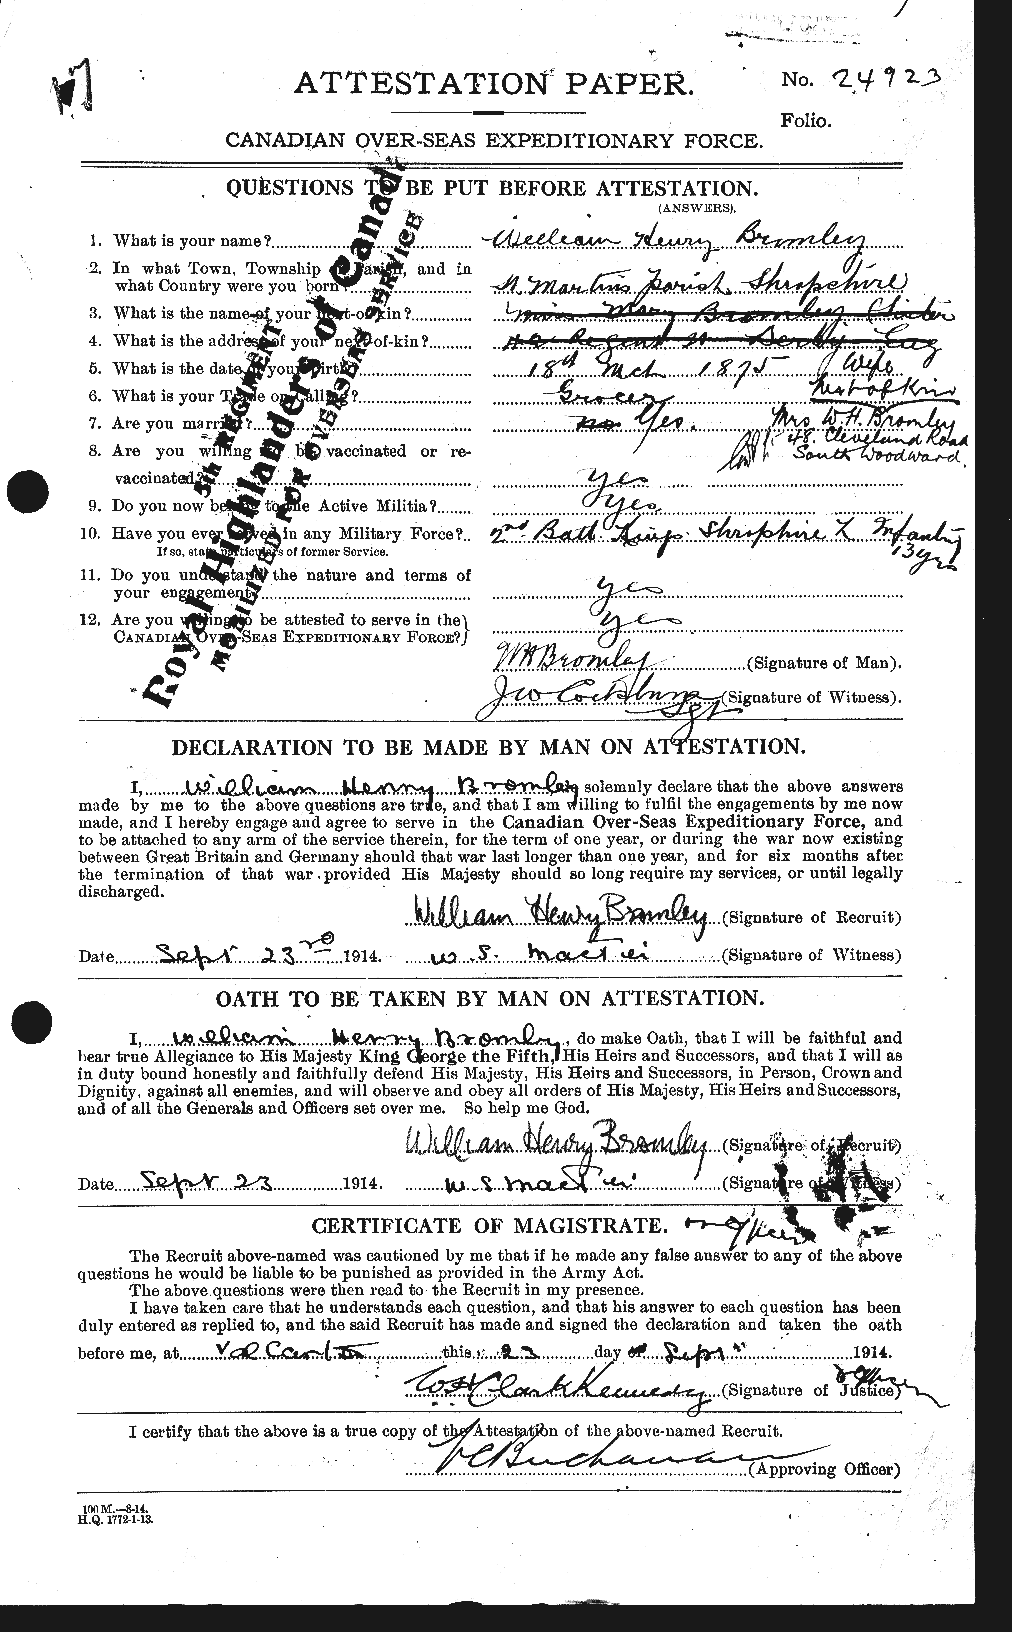 Personnel Records of the First World War - CEF 262191a